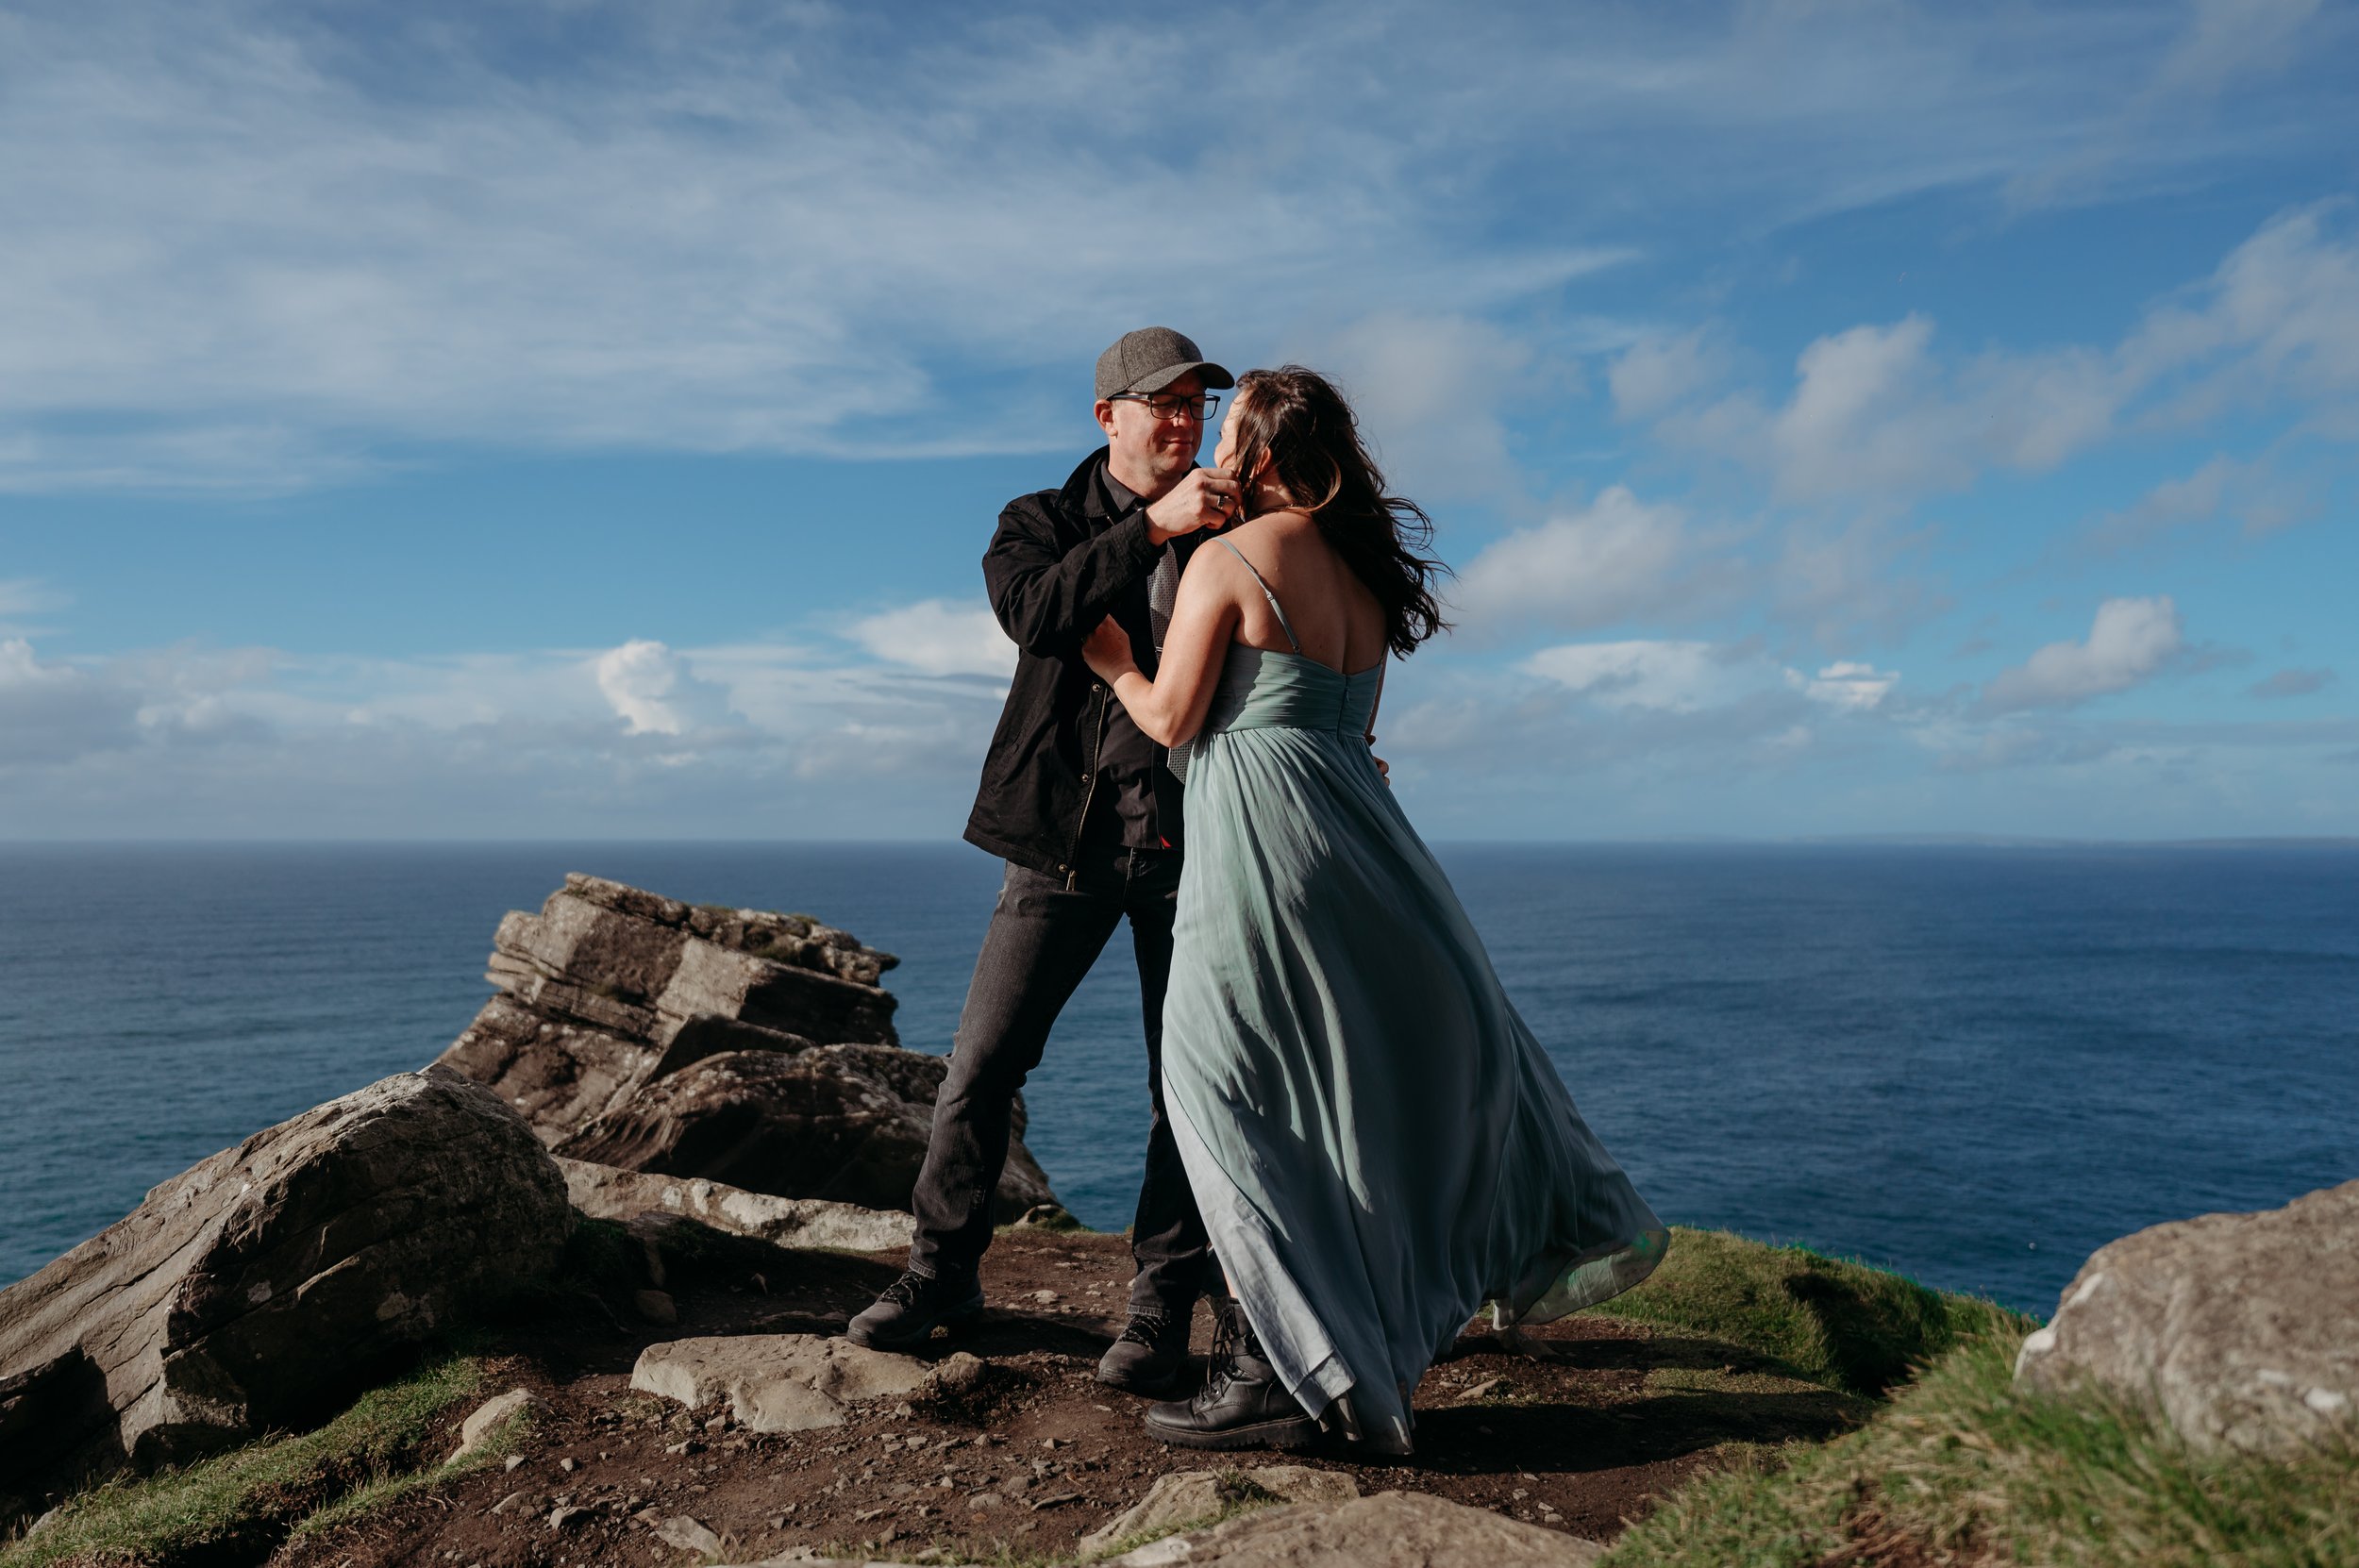 Marie O'Mahony photographer Cliffs of Moher anniversary couples photo session kissing at the top